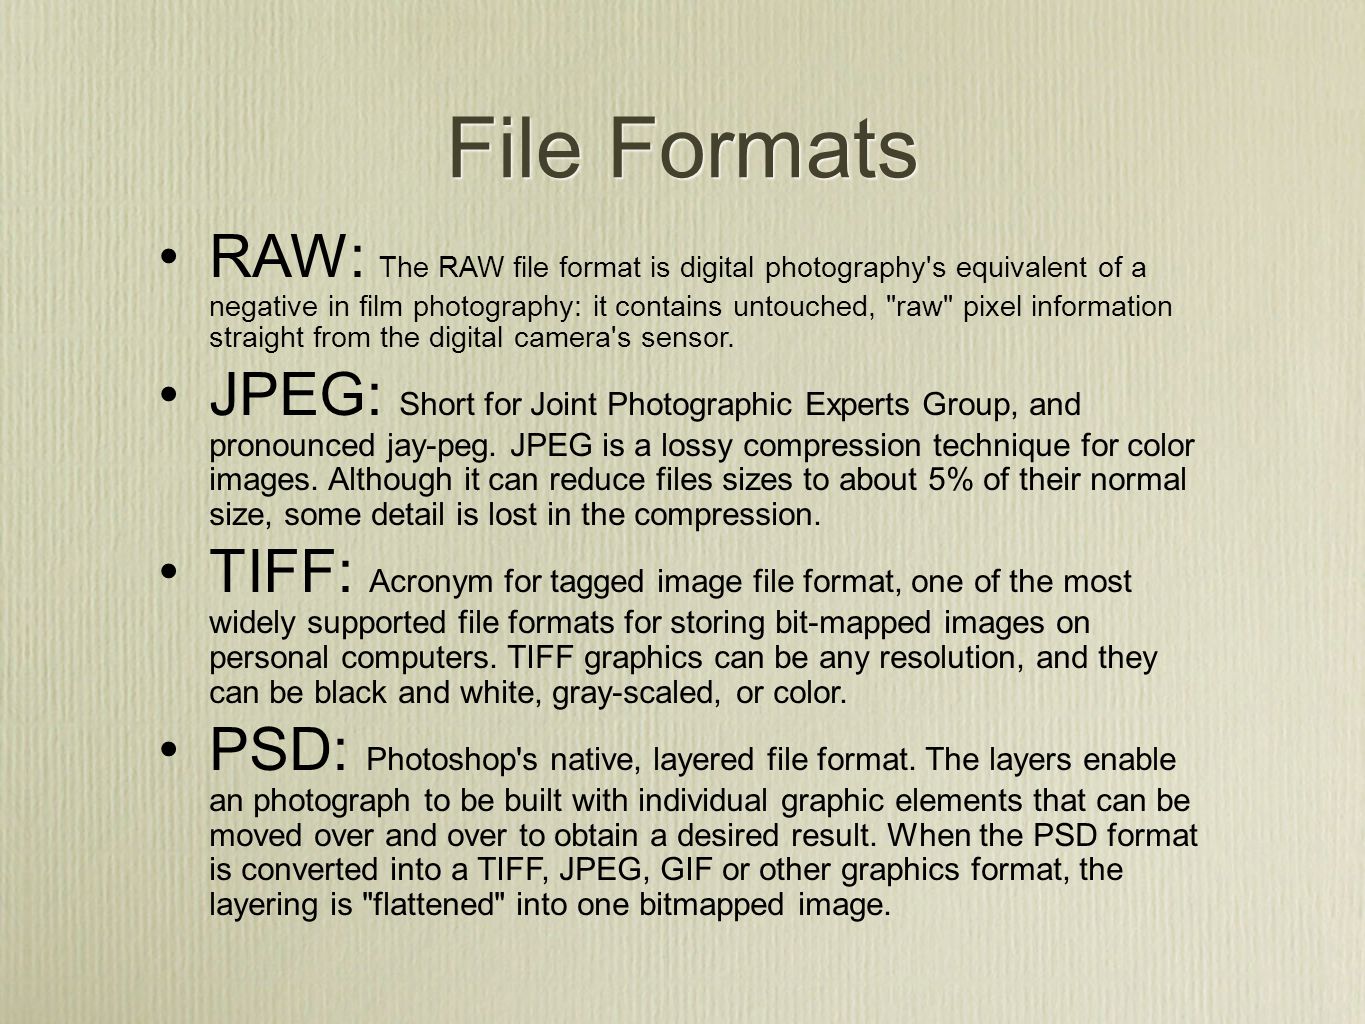 File Formats RAW: The RAW file format is digital photography s equivalent of a negative in film photography: it contains untouched, raw pixel information straight from the digital camera s sensor.